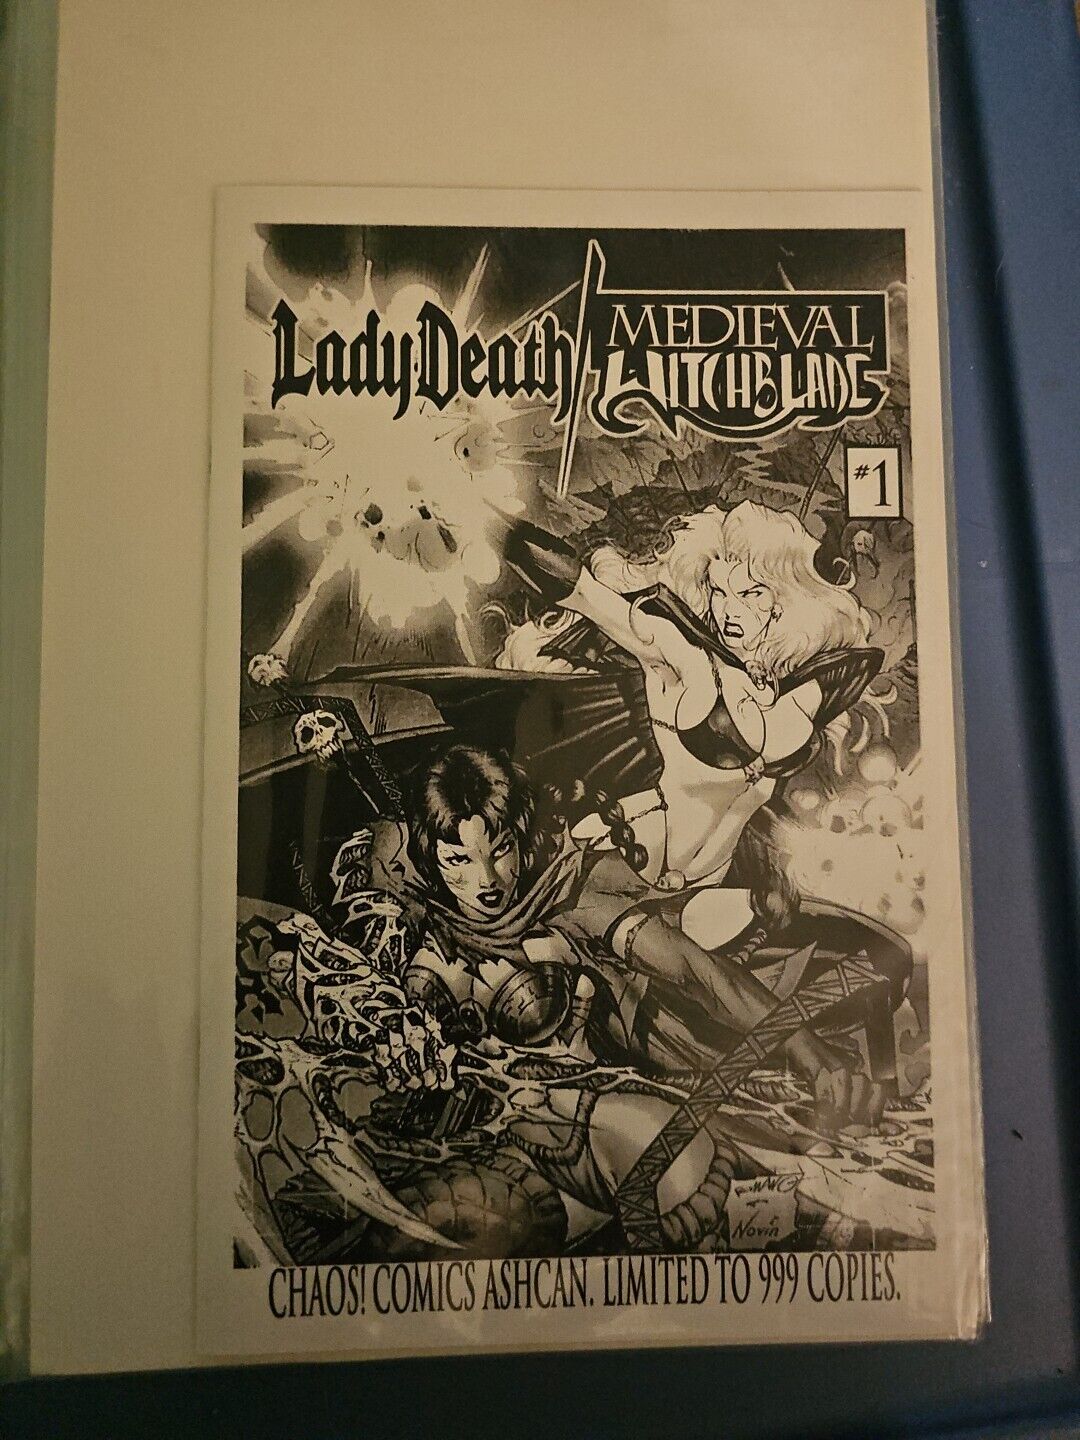 💥 Lady Death Medieval Witchblade # 1 Ashcan SCARCE Chaos Indie Pulido, Unopened